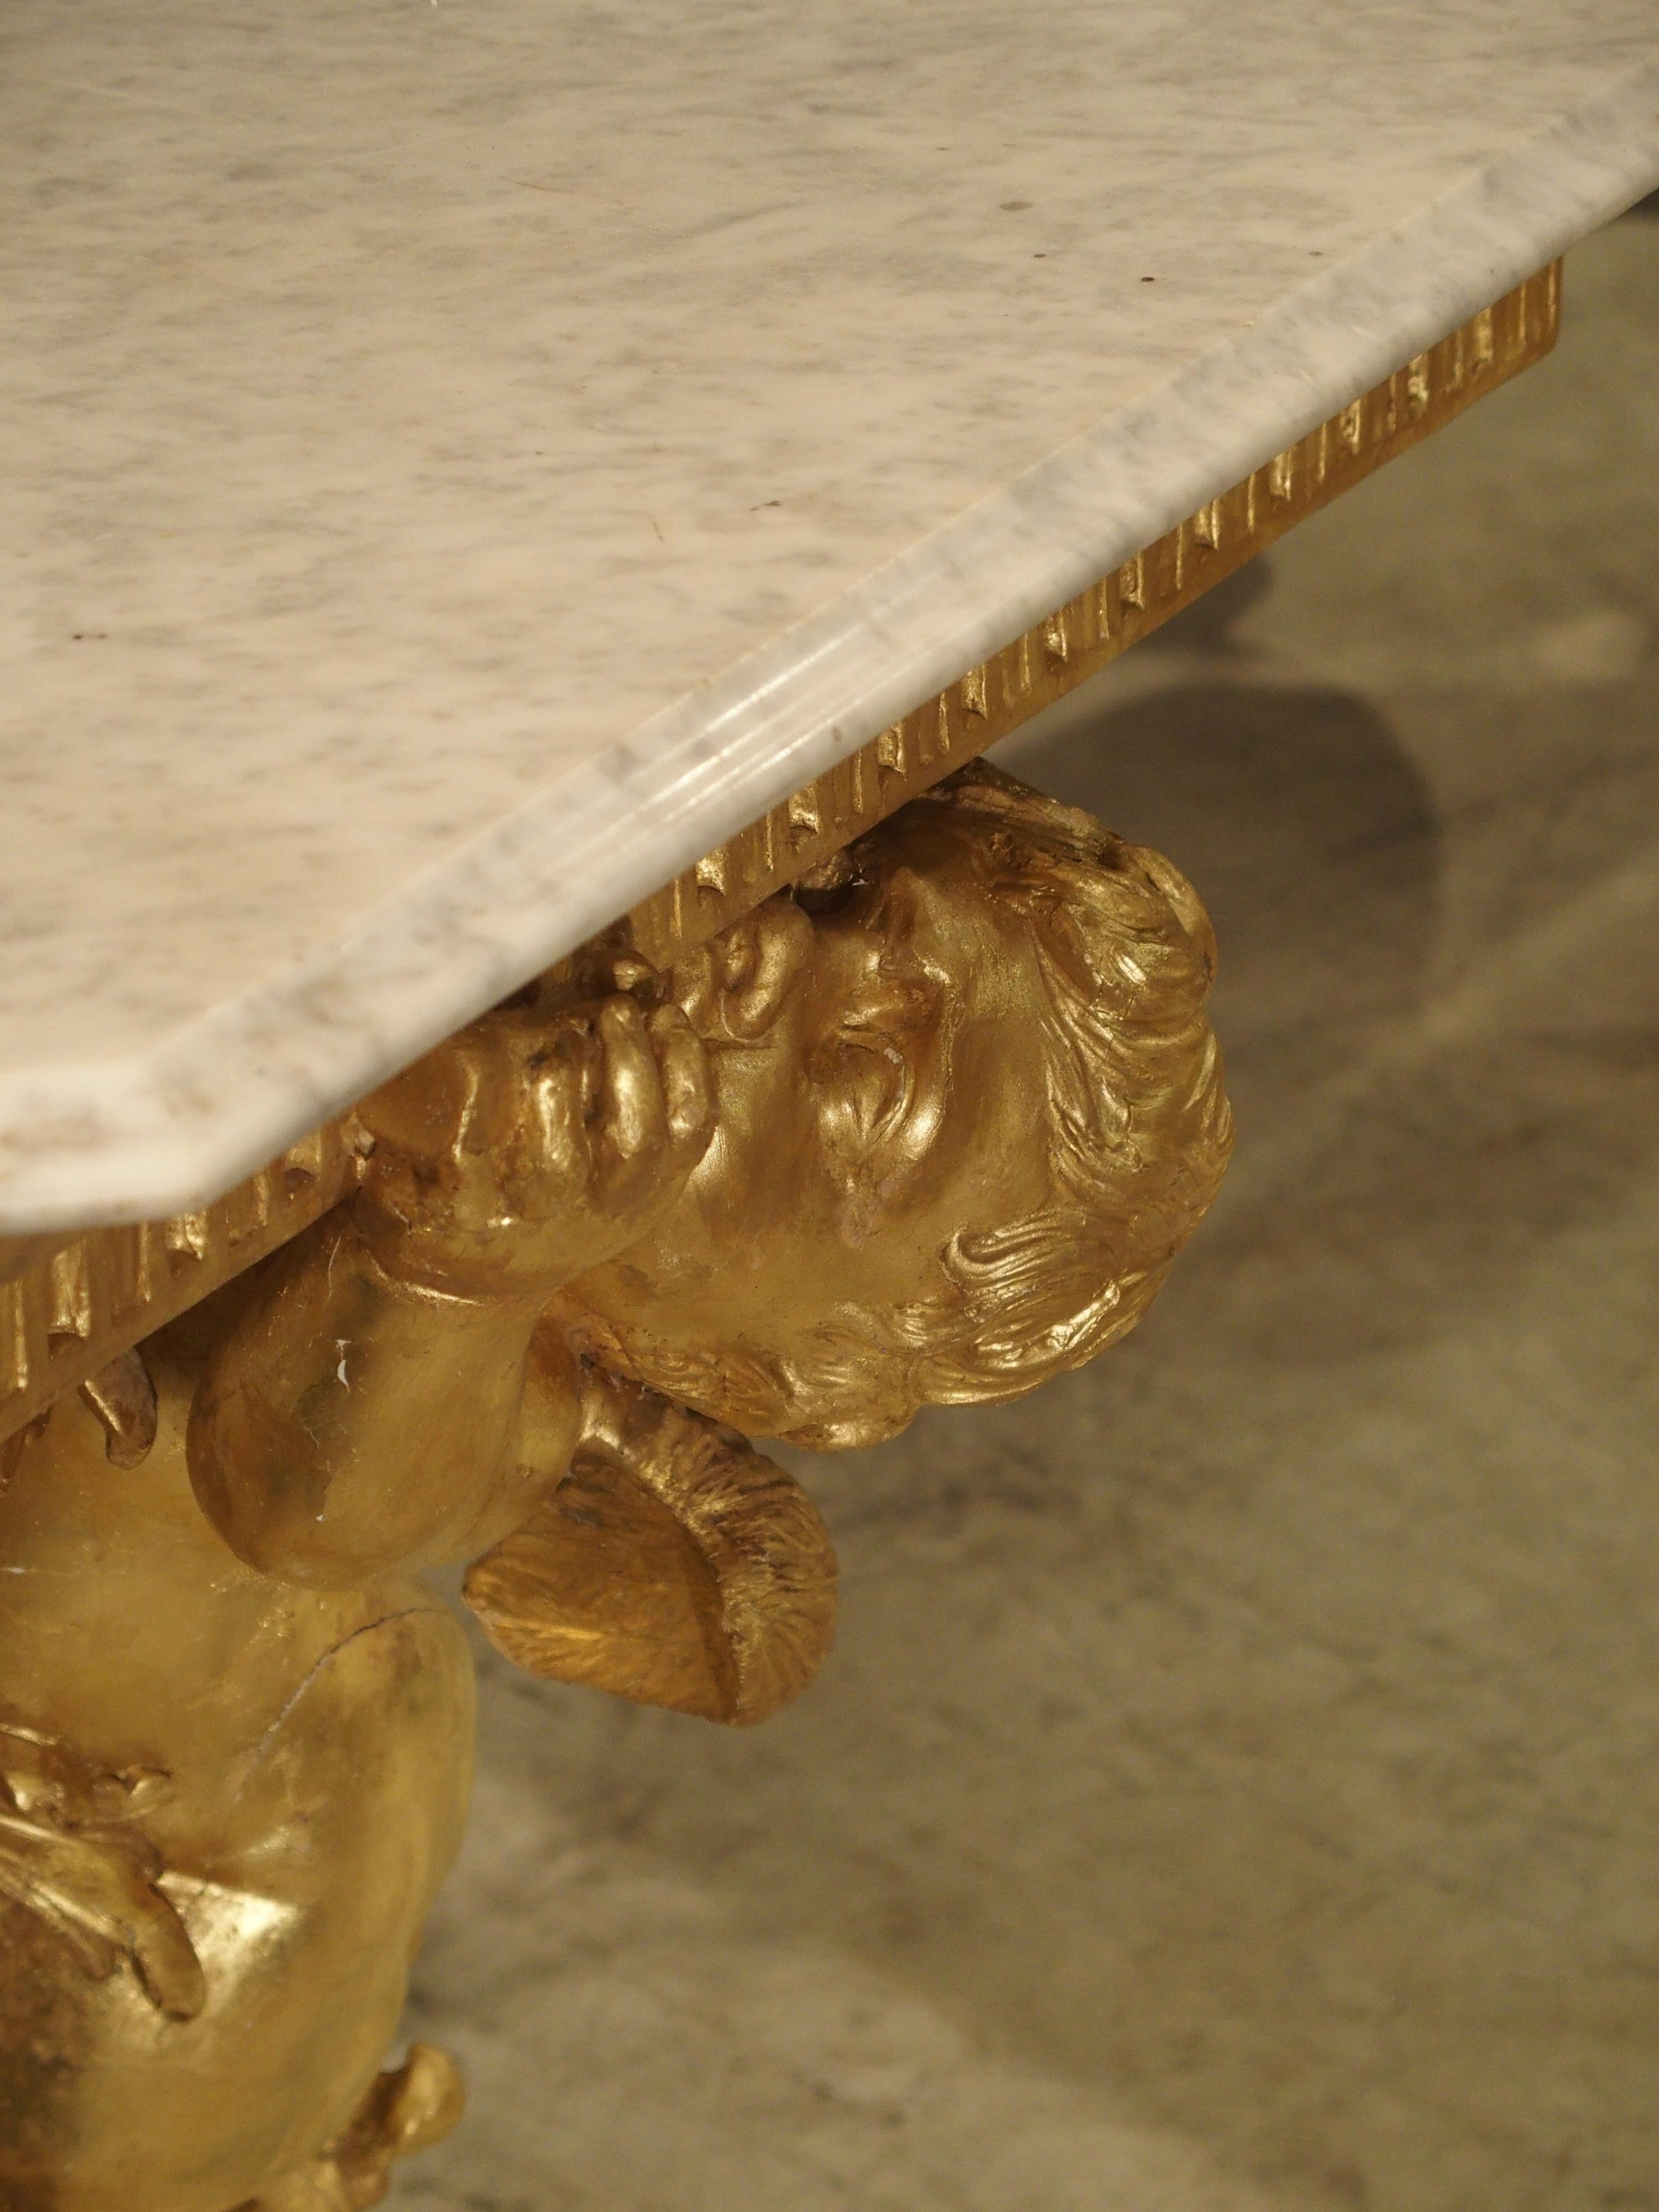 This exceptional antique giltwood console has been carved showing movement in its subject, the large cherub. The determined cherub is using his entire body to place an item in his left hand on top of the console. His right shoulder is pressing